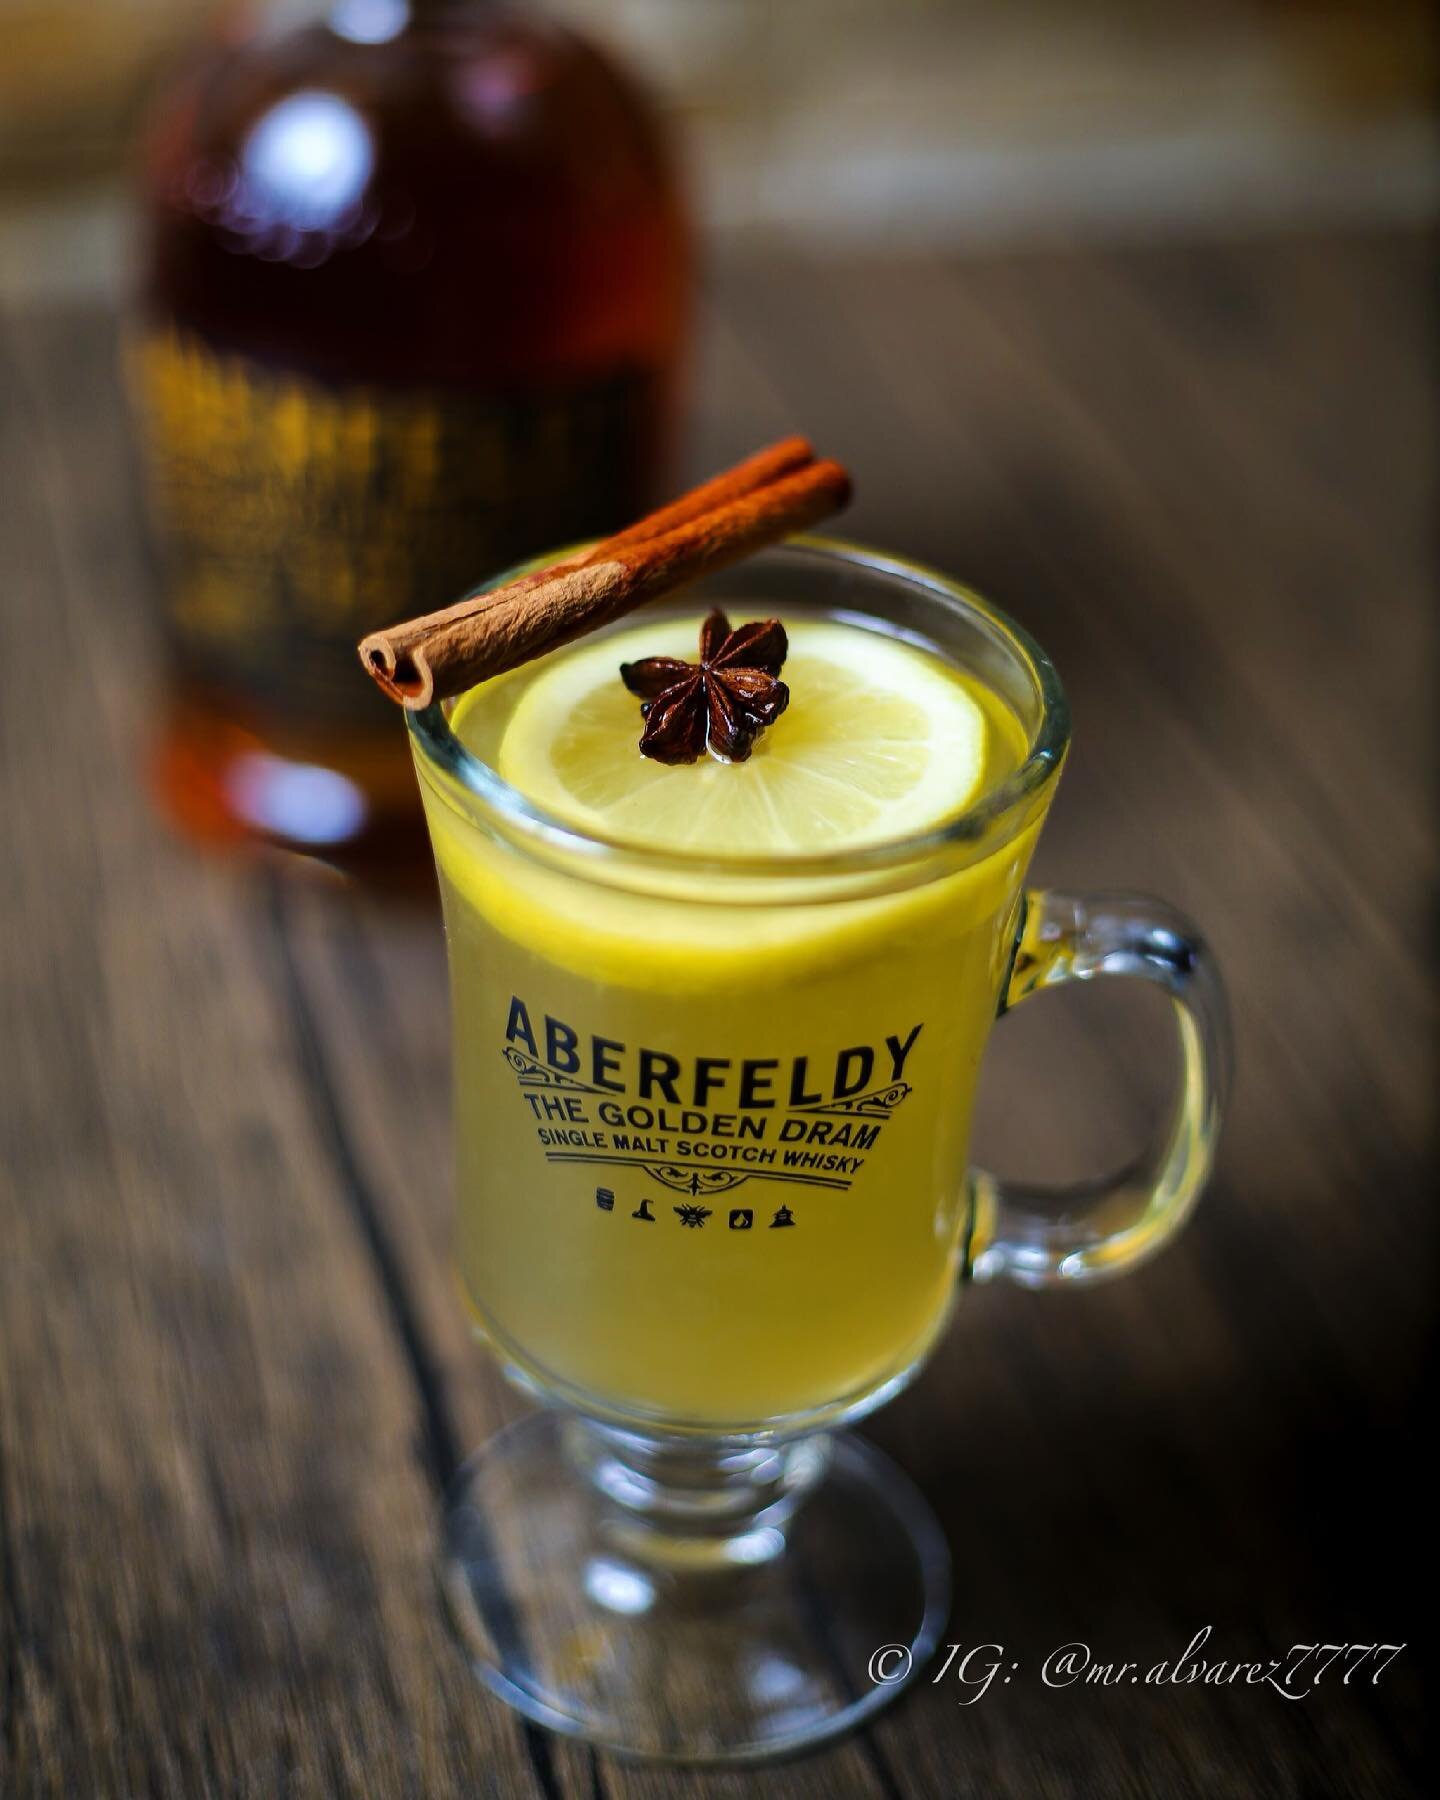 We got that Hot Toddy for you! Cold &amp; gloomy days calls for a warm Hot Toddy made with Aberfeldy Scotch Whiskey! 🥃🥃 
.
.
.
#bocaitony #jacksonheightsnyc #jacksonheightsqueens #queensnyc #nyceats #queenseats #northernblvdjj #northernblvdqueens #